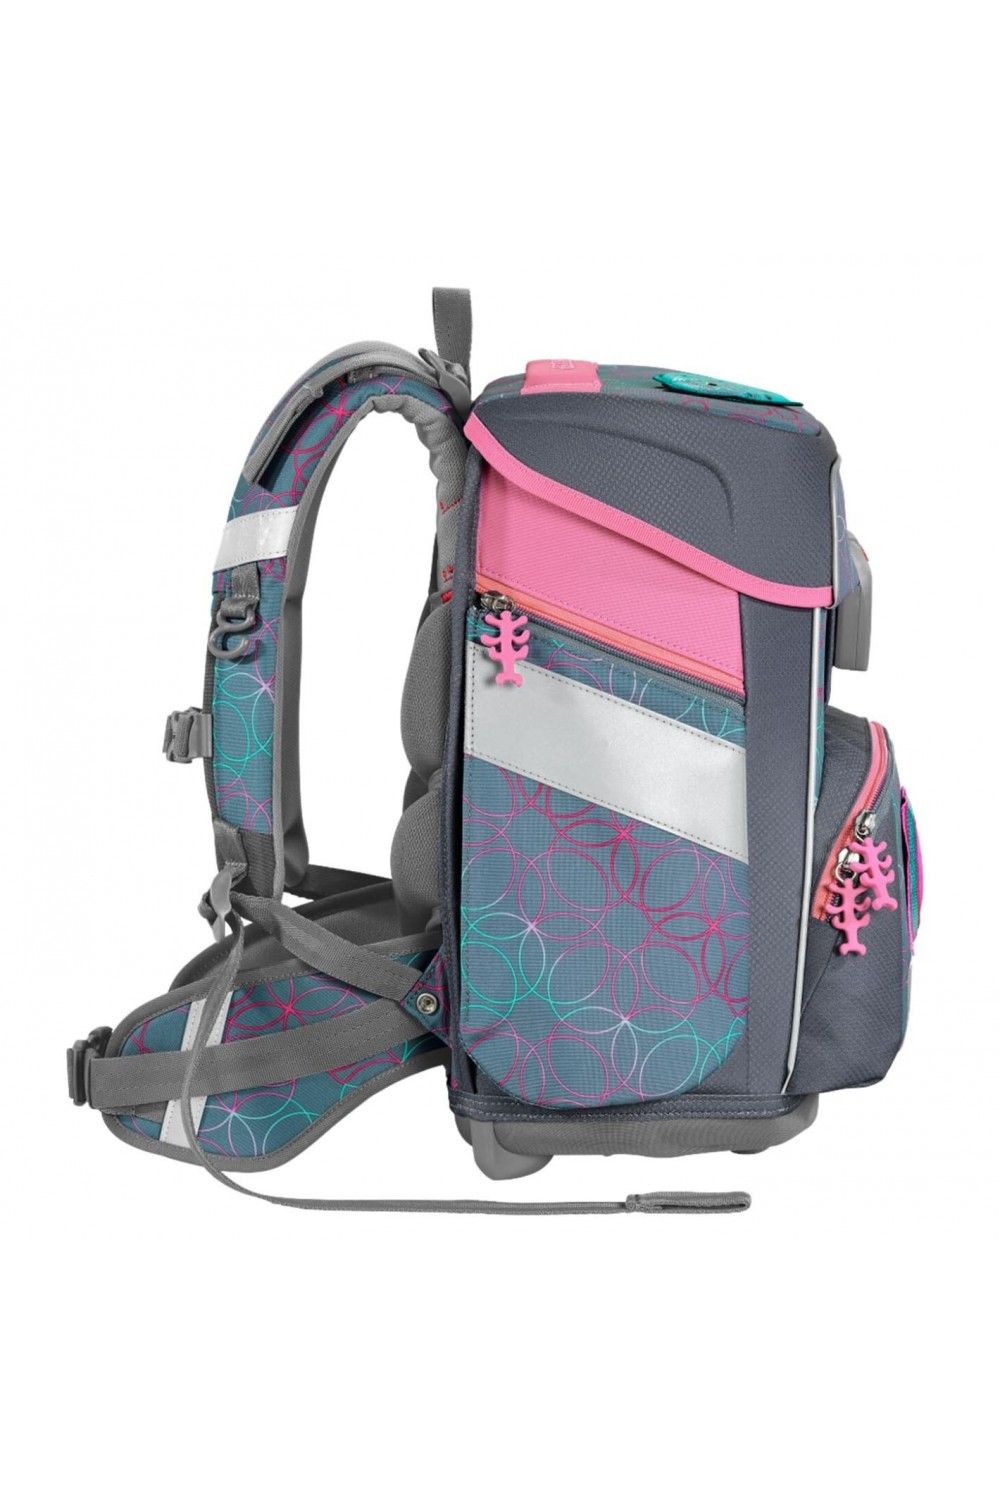 School backpack set Step by Step Space 5 pieces Glitter Heart